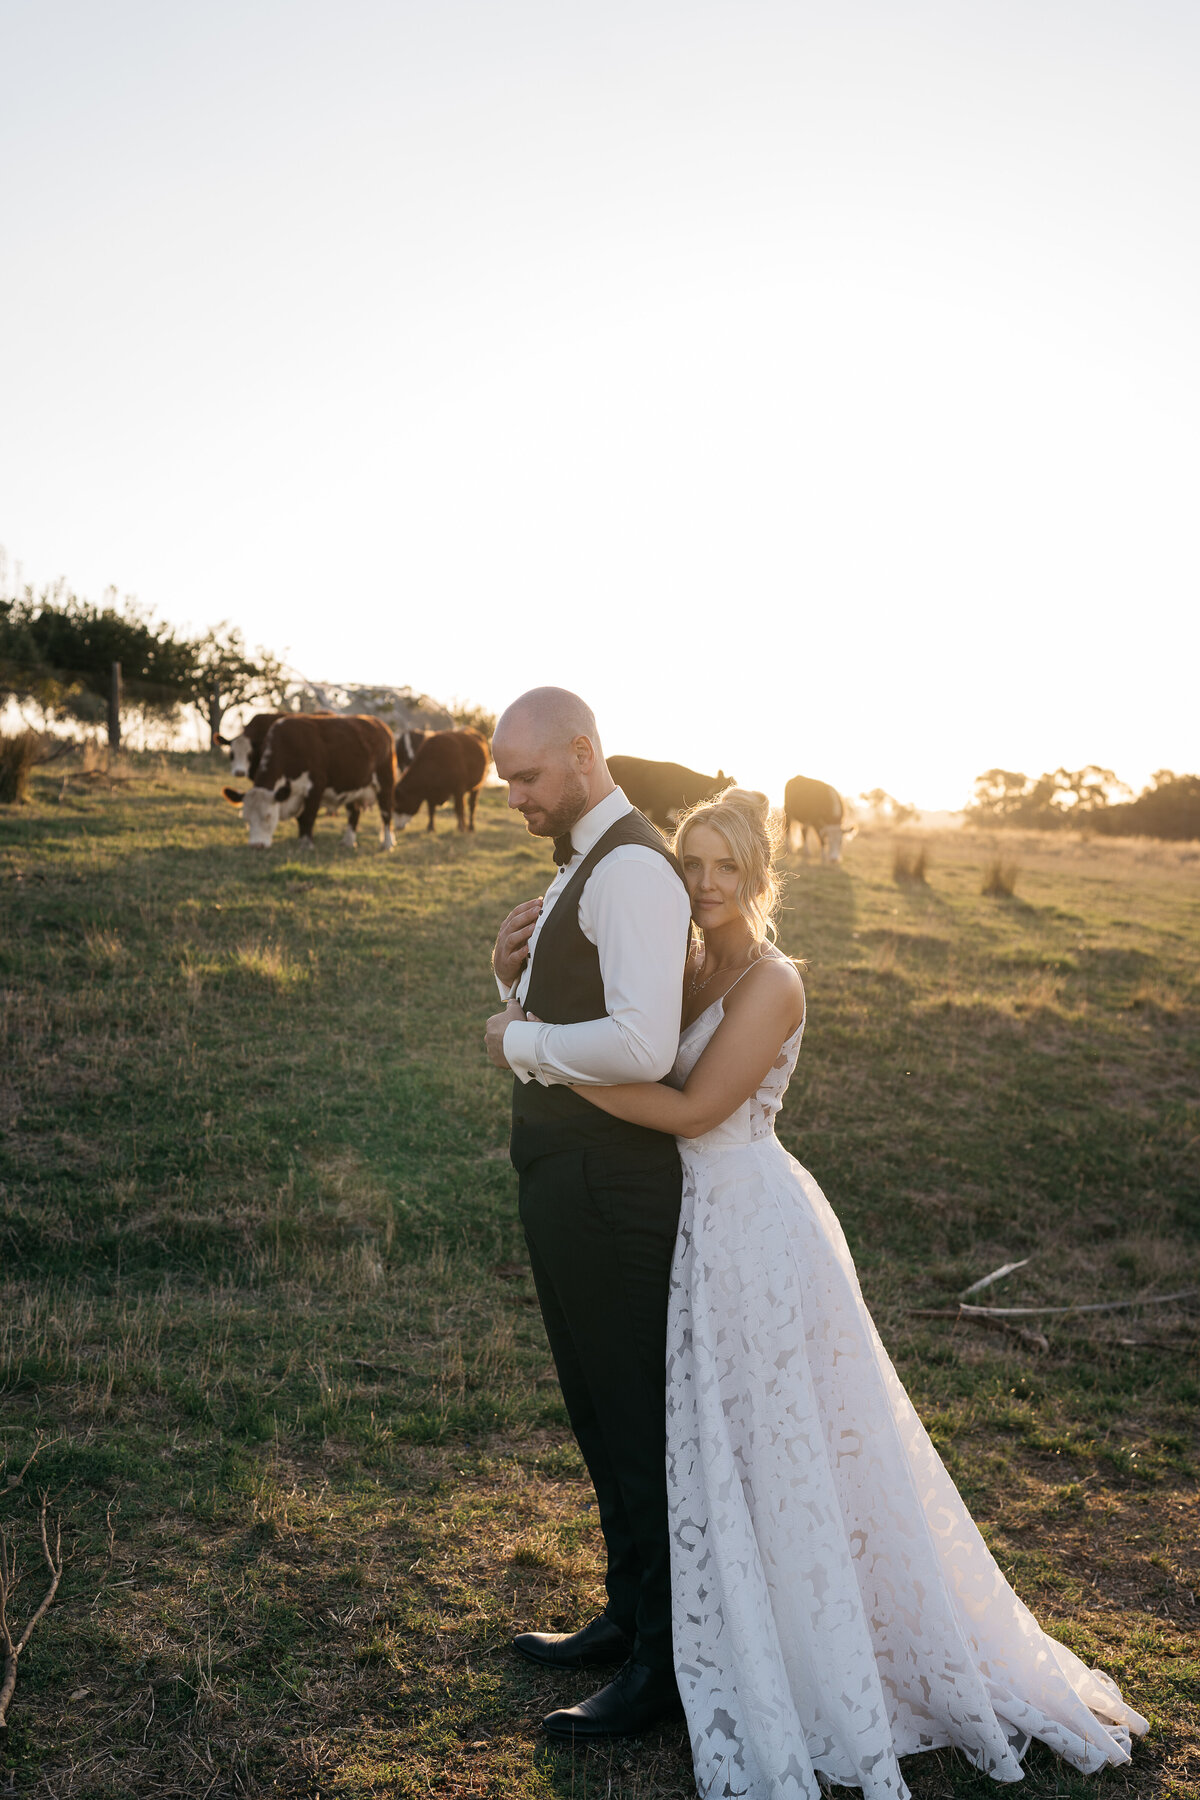 Courtney Laura Photography, Yarra Valley Wedding Photographer, The Farm Yarra Valley, Cassie and Kieren-951